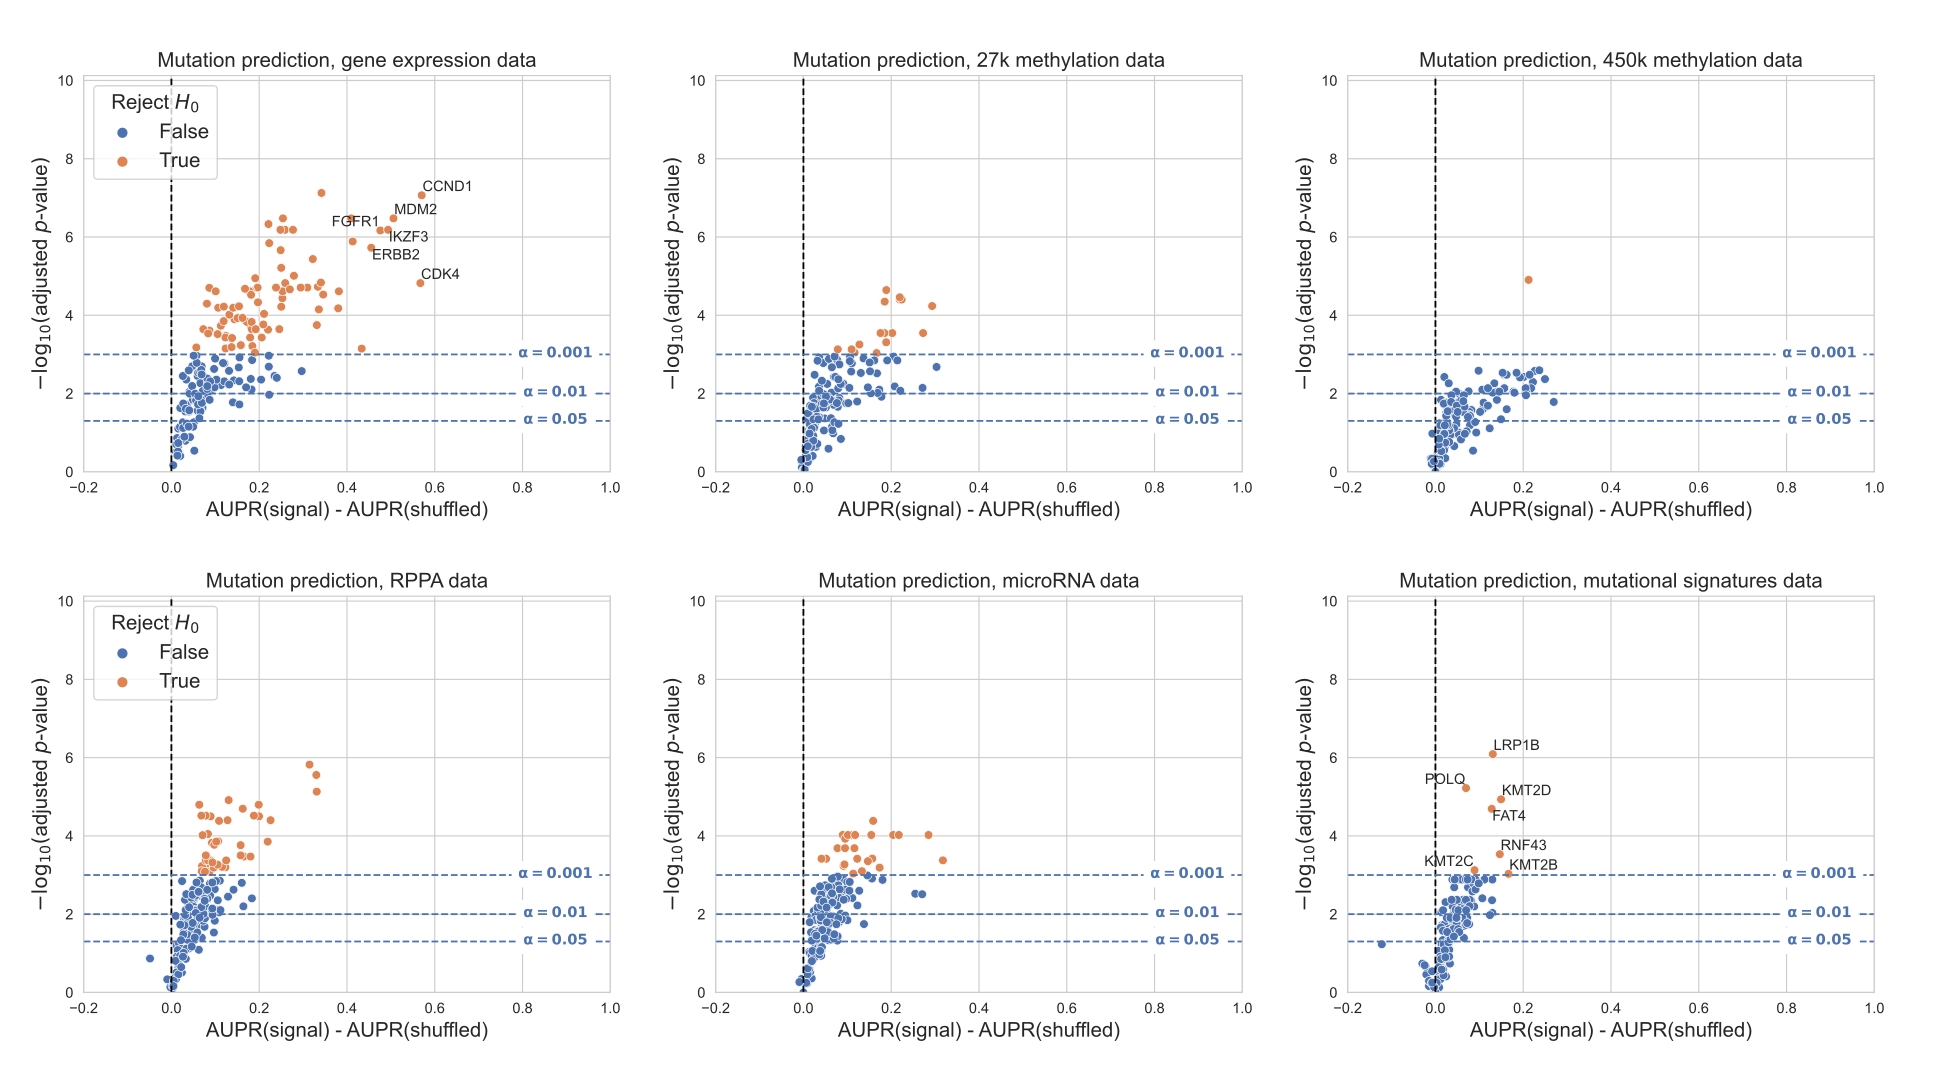 Figure S4: Volcano-like plots showing predictive performance for each gene in the cancer-related gene set for all data types, relative to the permuted baseline model, when genes are filtered based on the entire dataset rather than by cancer type. For this filtering approach, we included/excluded entire genes rather than individual cancer types: specifically, we trained a classifier for each gene where all cancer types combined had at least 5% mutated samples and at least 100 total mutated samples, resulting in 182 total classifiers. The x-axis shows the difference in mean AUPR compared with a baseline model trained on permuted labels, and the y-axis shows p-values for a paired t-test comparing cross-validated AUPR values within folds. Counts of genes making the significance threshold of 0.001: gene expression 81/182 (44.5%), 27K methylation 16/182 (8.8%), 450K methylation 1/182 (0.6%), RPPA 41/182 (22.5%), microRNA 25/182 (13.7%), mutational signatures 7/182 (3.9%).